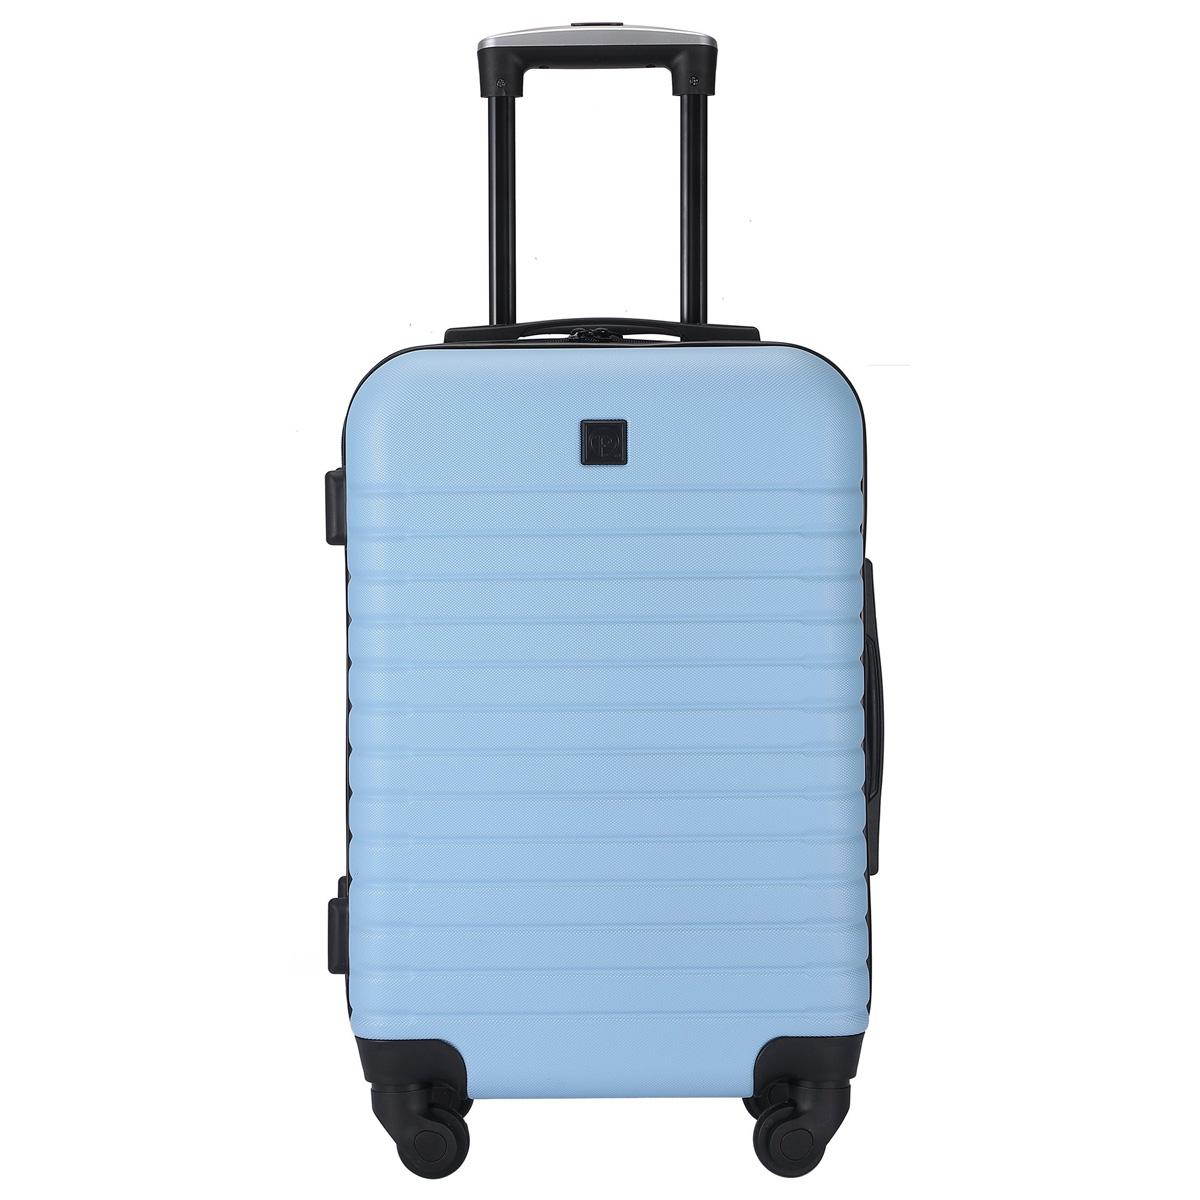 Protege 20in Hardside Carry-on Luggage for $35 Shipped